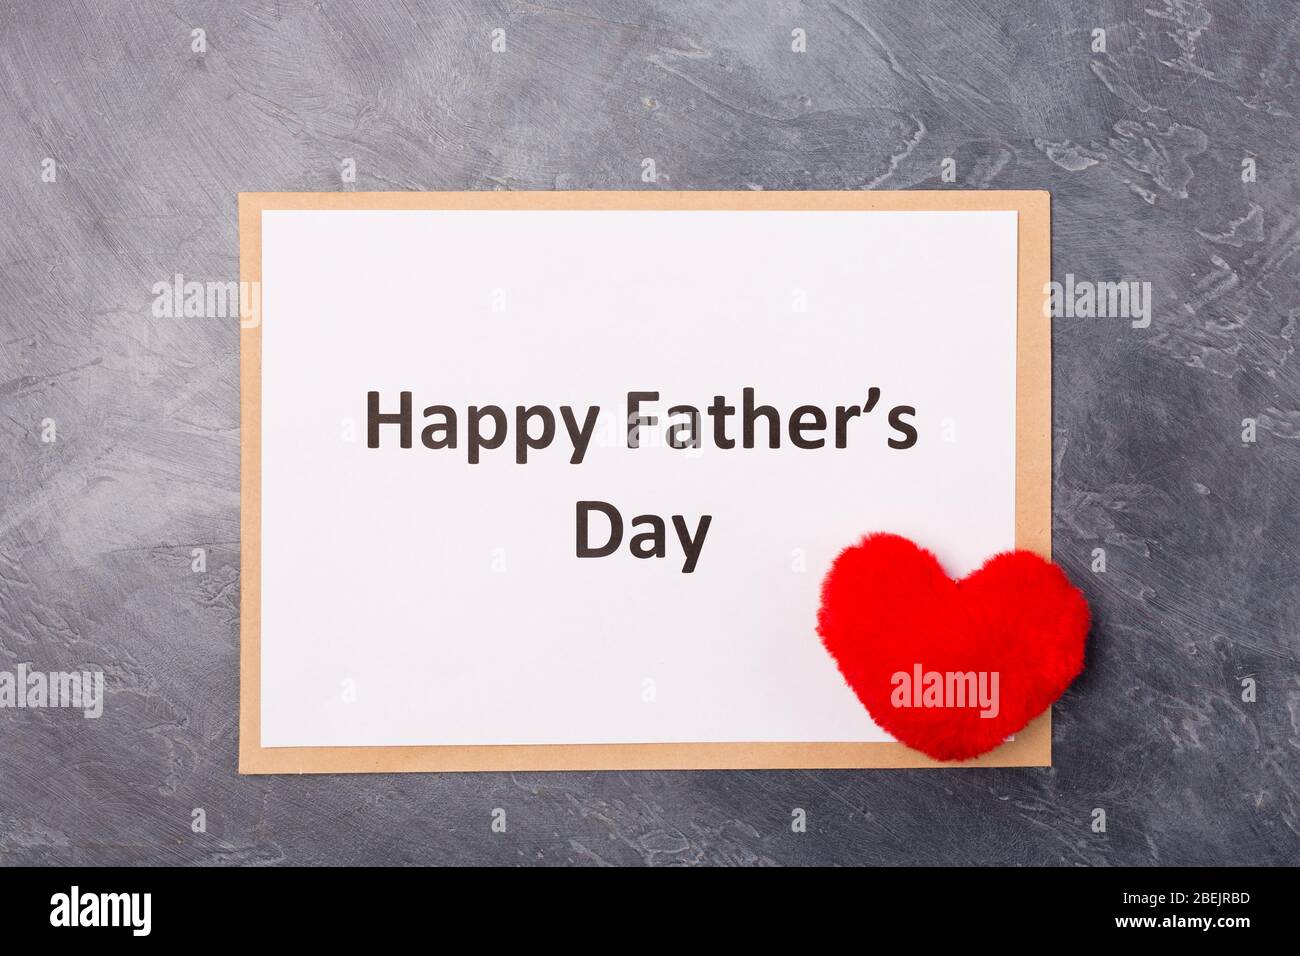 Happy Father's Day text on grey background with red heart. Free space. Space for text. Father's day holiday concept.  Stock Photo